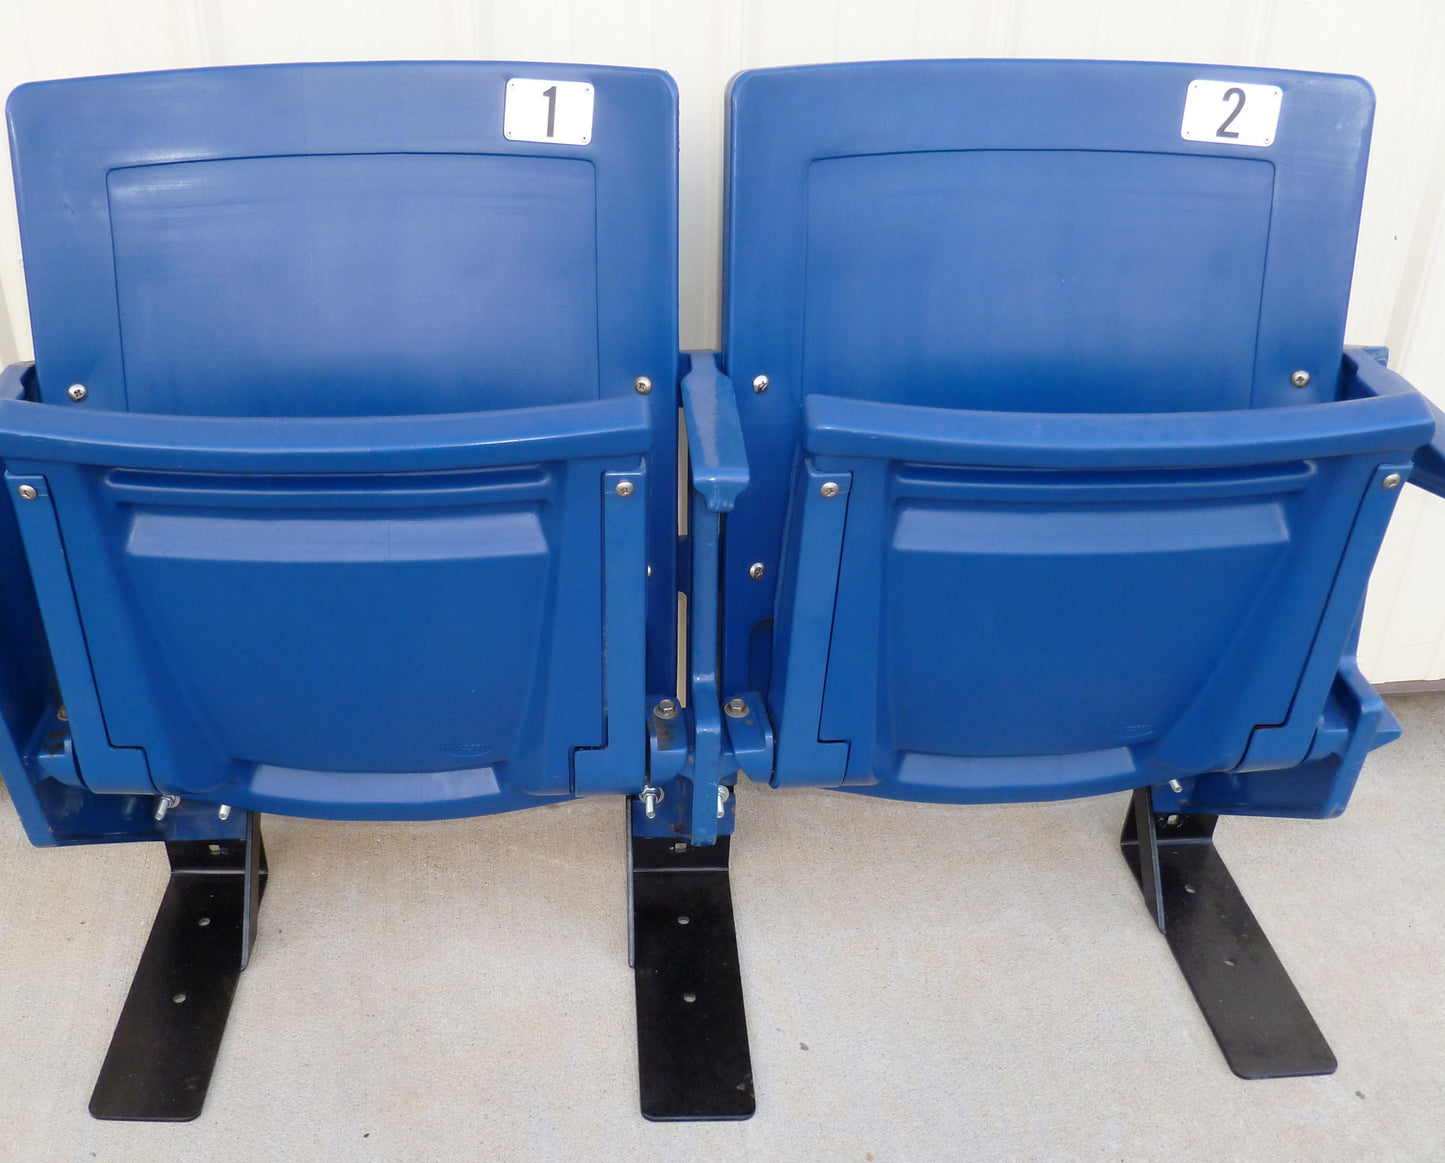 MEADOWLANDS GIANTS STADIUM - unrestored as-is condition - ROYAL BLUE w/BLUE RISER-MOUNT STANDARDS